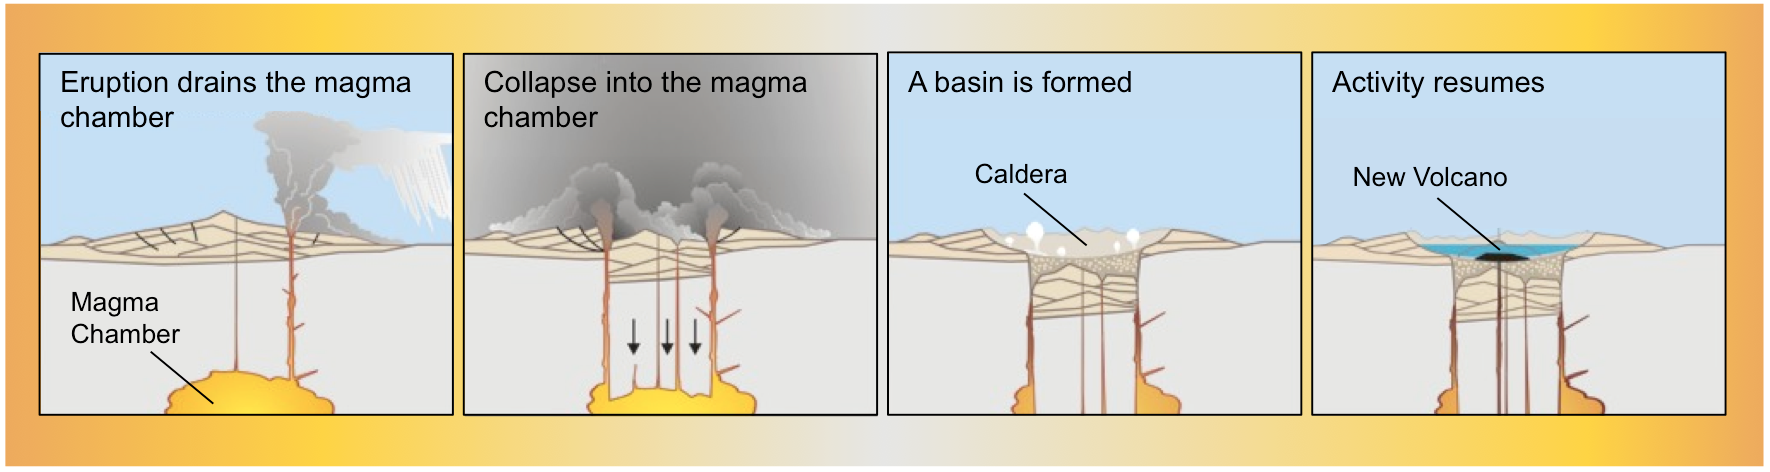 Formation of a caldera. Calderas are the result of a volcano collapsing into a drained magma chamber. _Source: Karla Panchuk (2017) CC BY 4.0. Modified after U. S. Geological Survey (2002) Public Domain [view source](https://pubs.usgs.gov/fs/2002/fs092-02/images/collapse.jpg)_